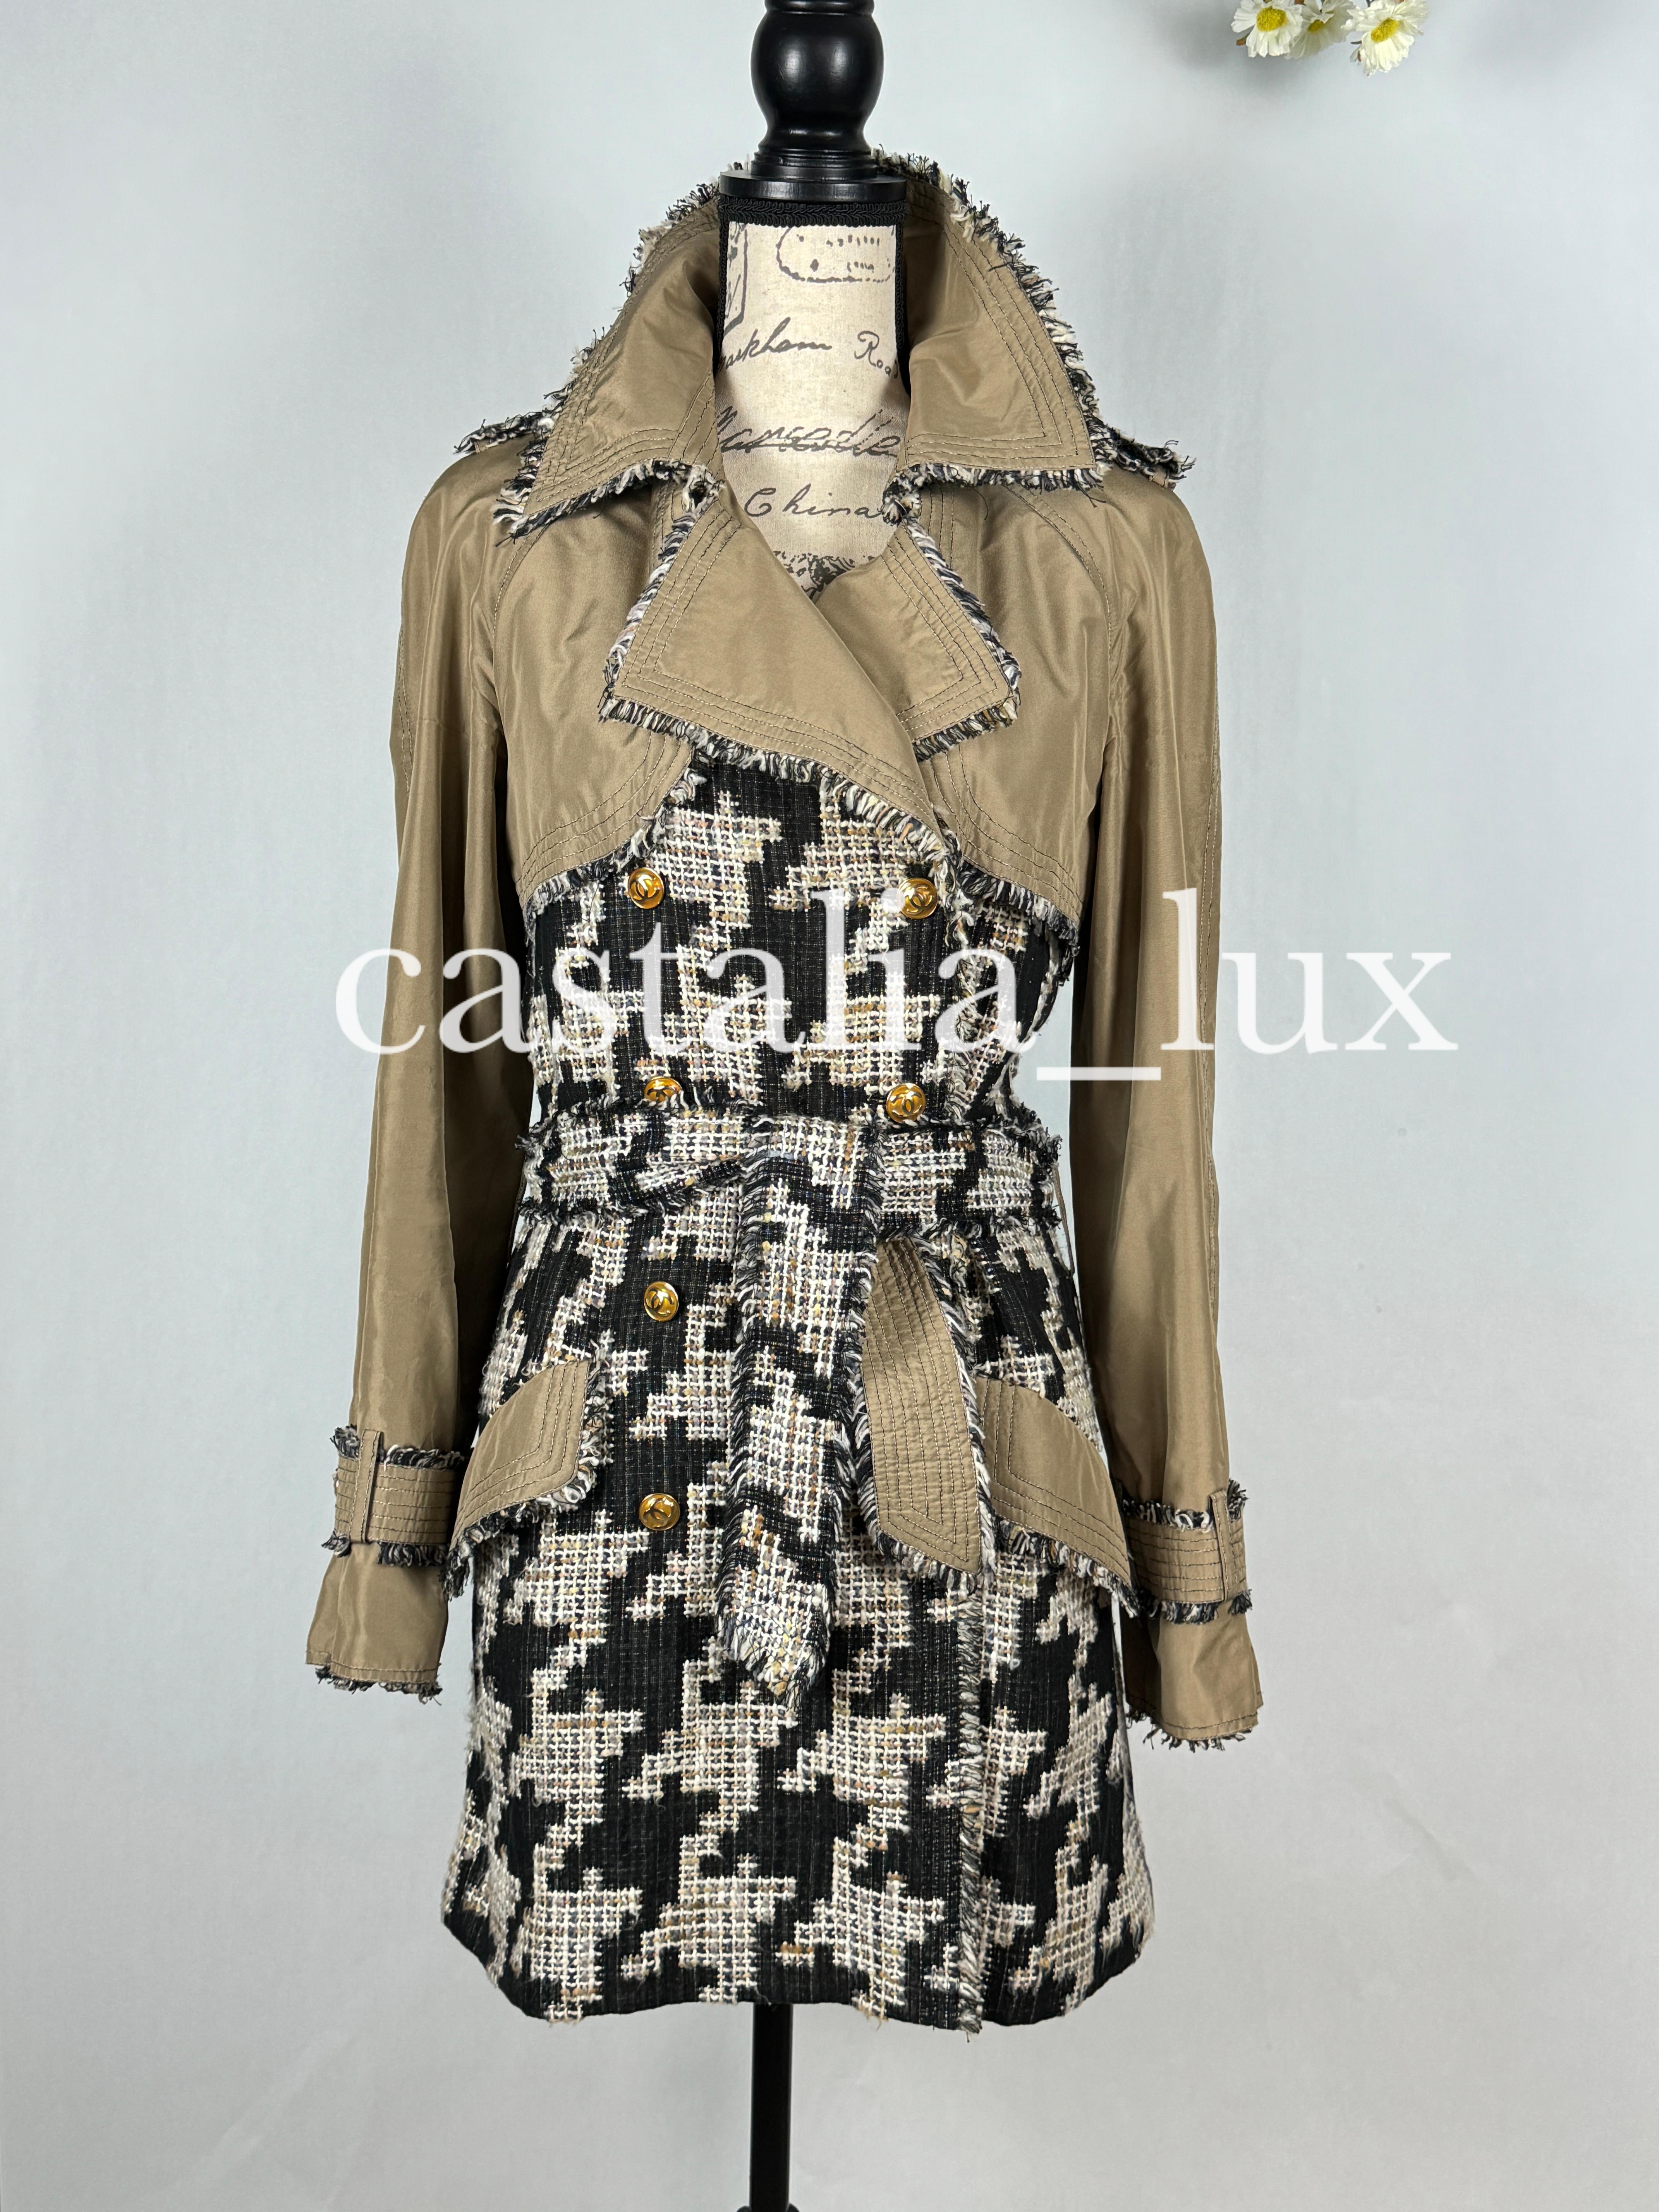 Chanel 9K$ Rarest Vogue Cover Tweed Trench Coat For Sale 7